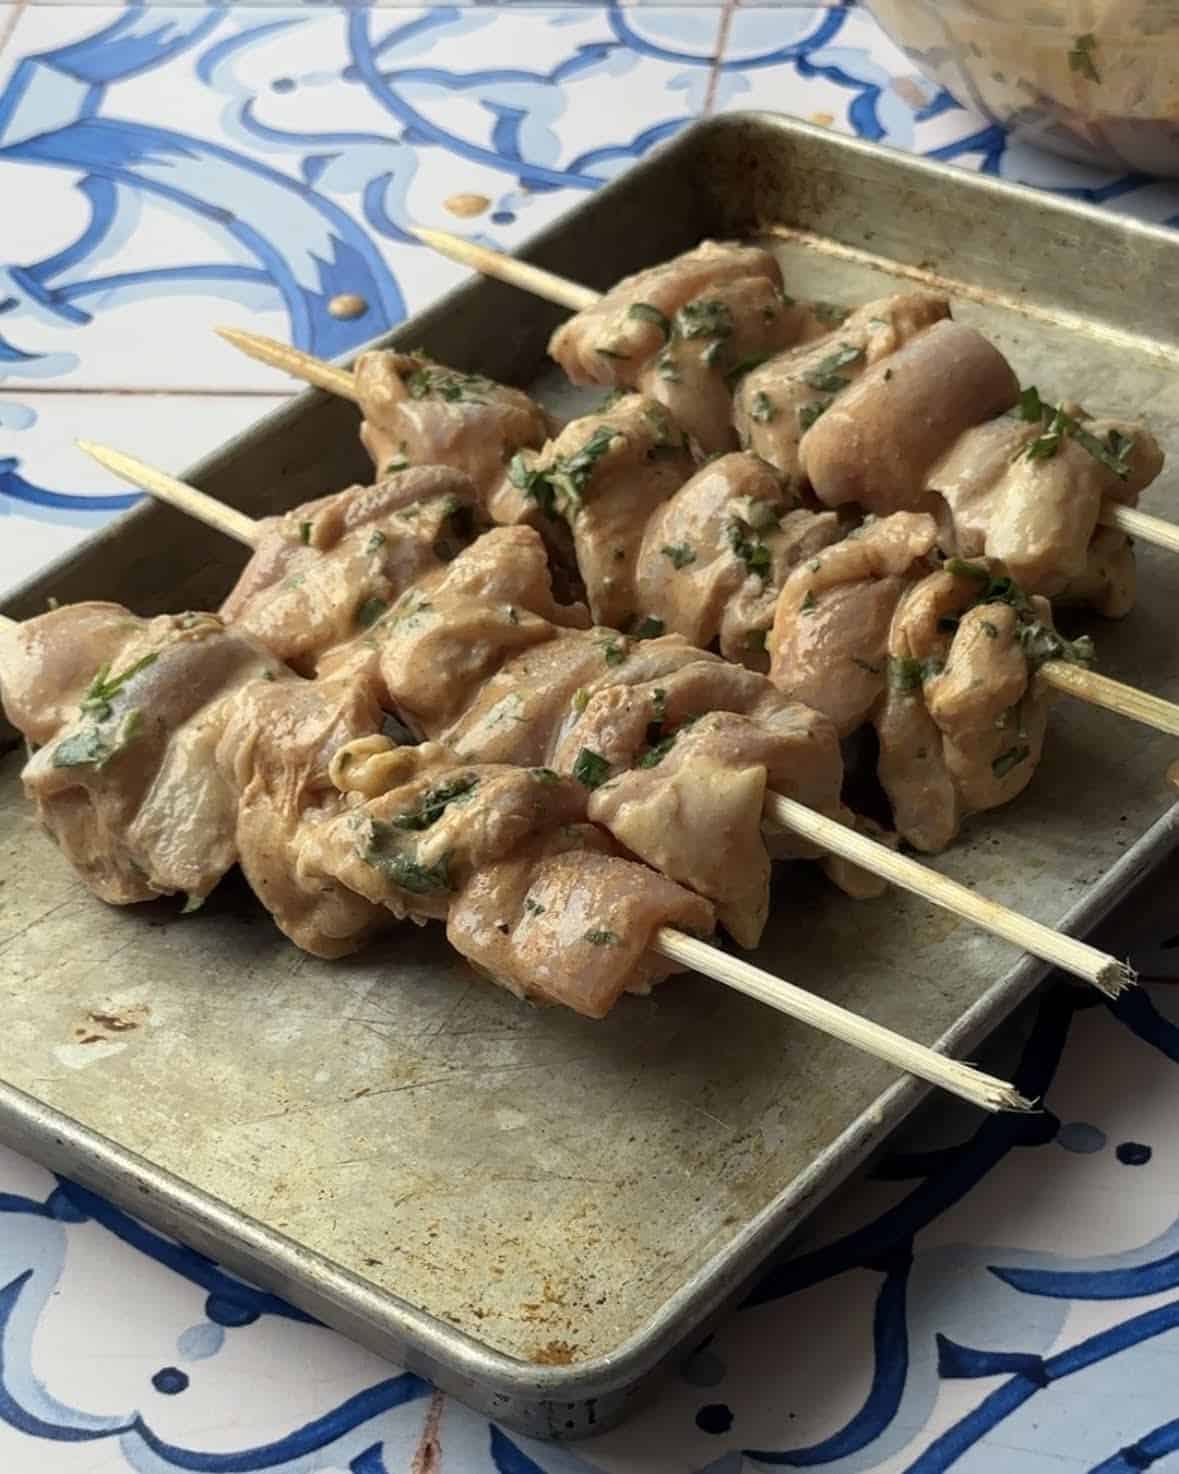 Four  Mediterranean chicken skewers threaded onto wooden skewers, ready for grilling.